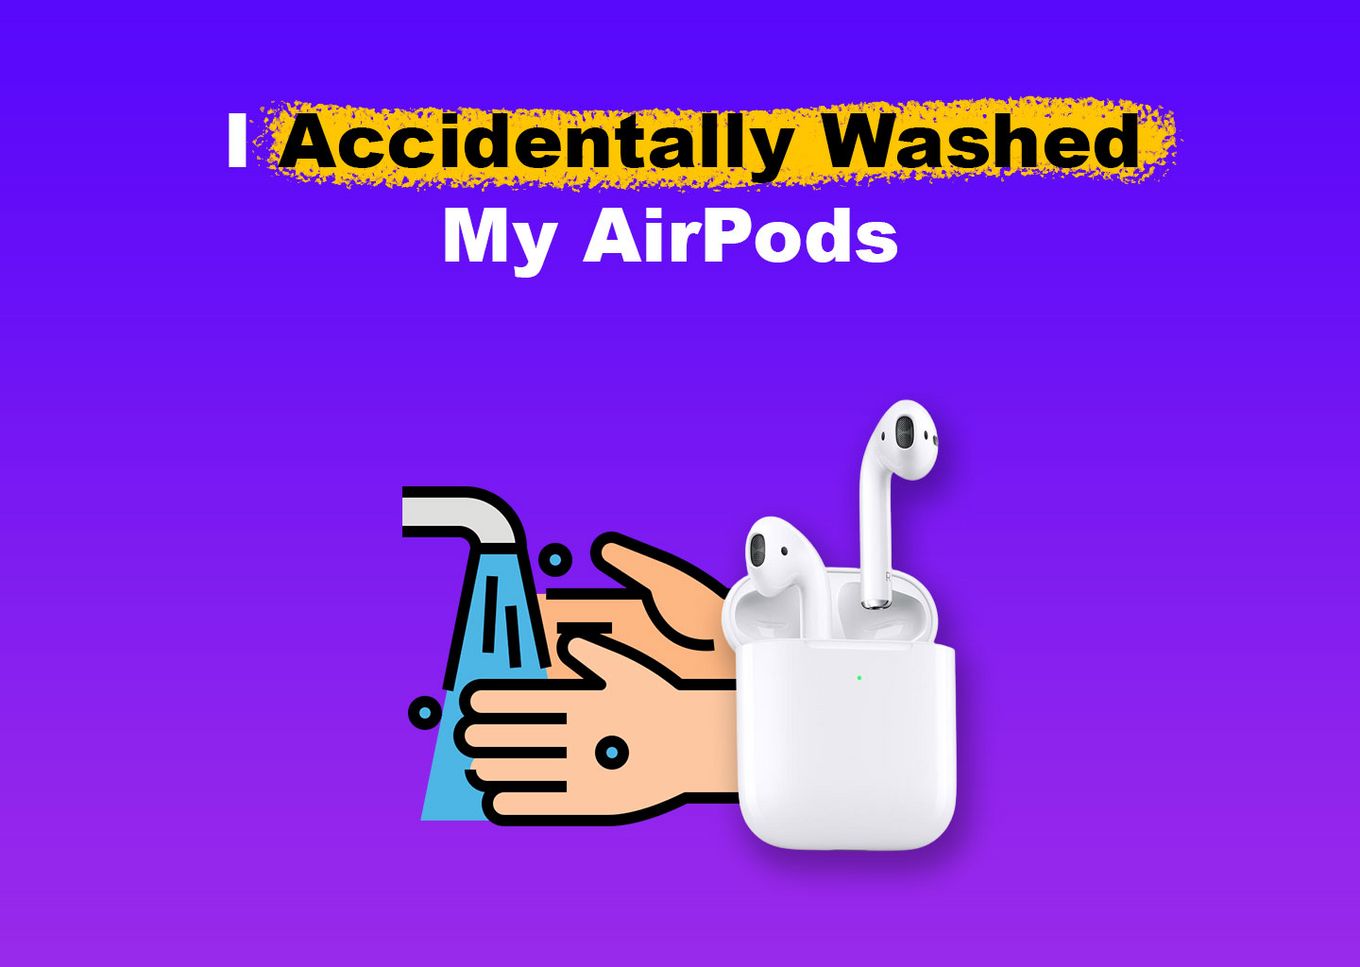 I accidentally washed my AirPods